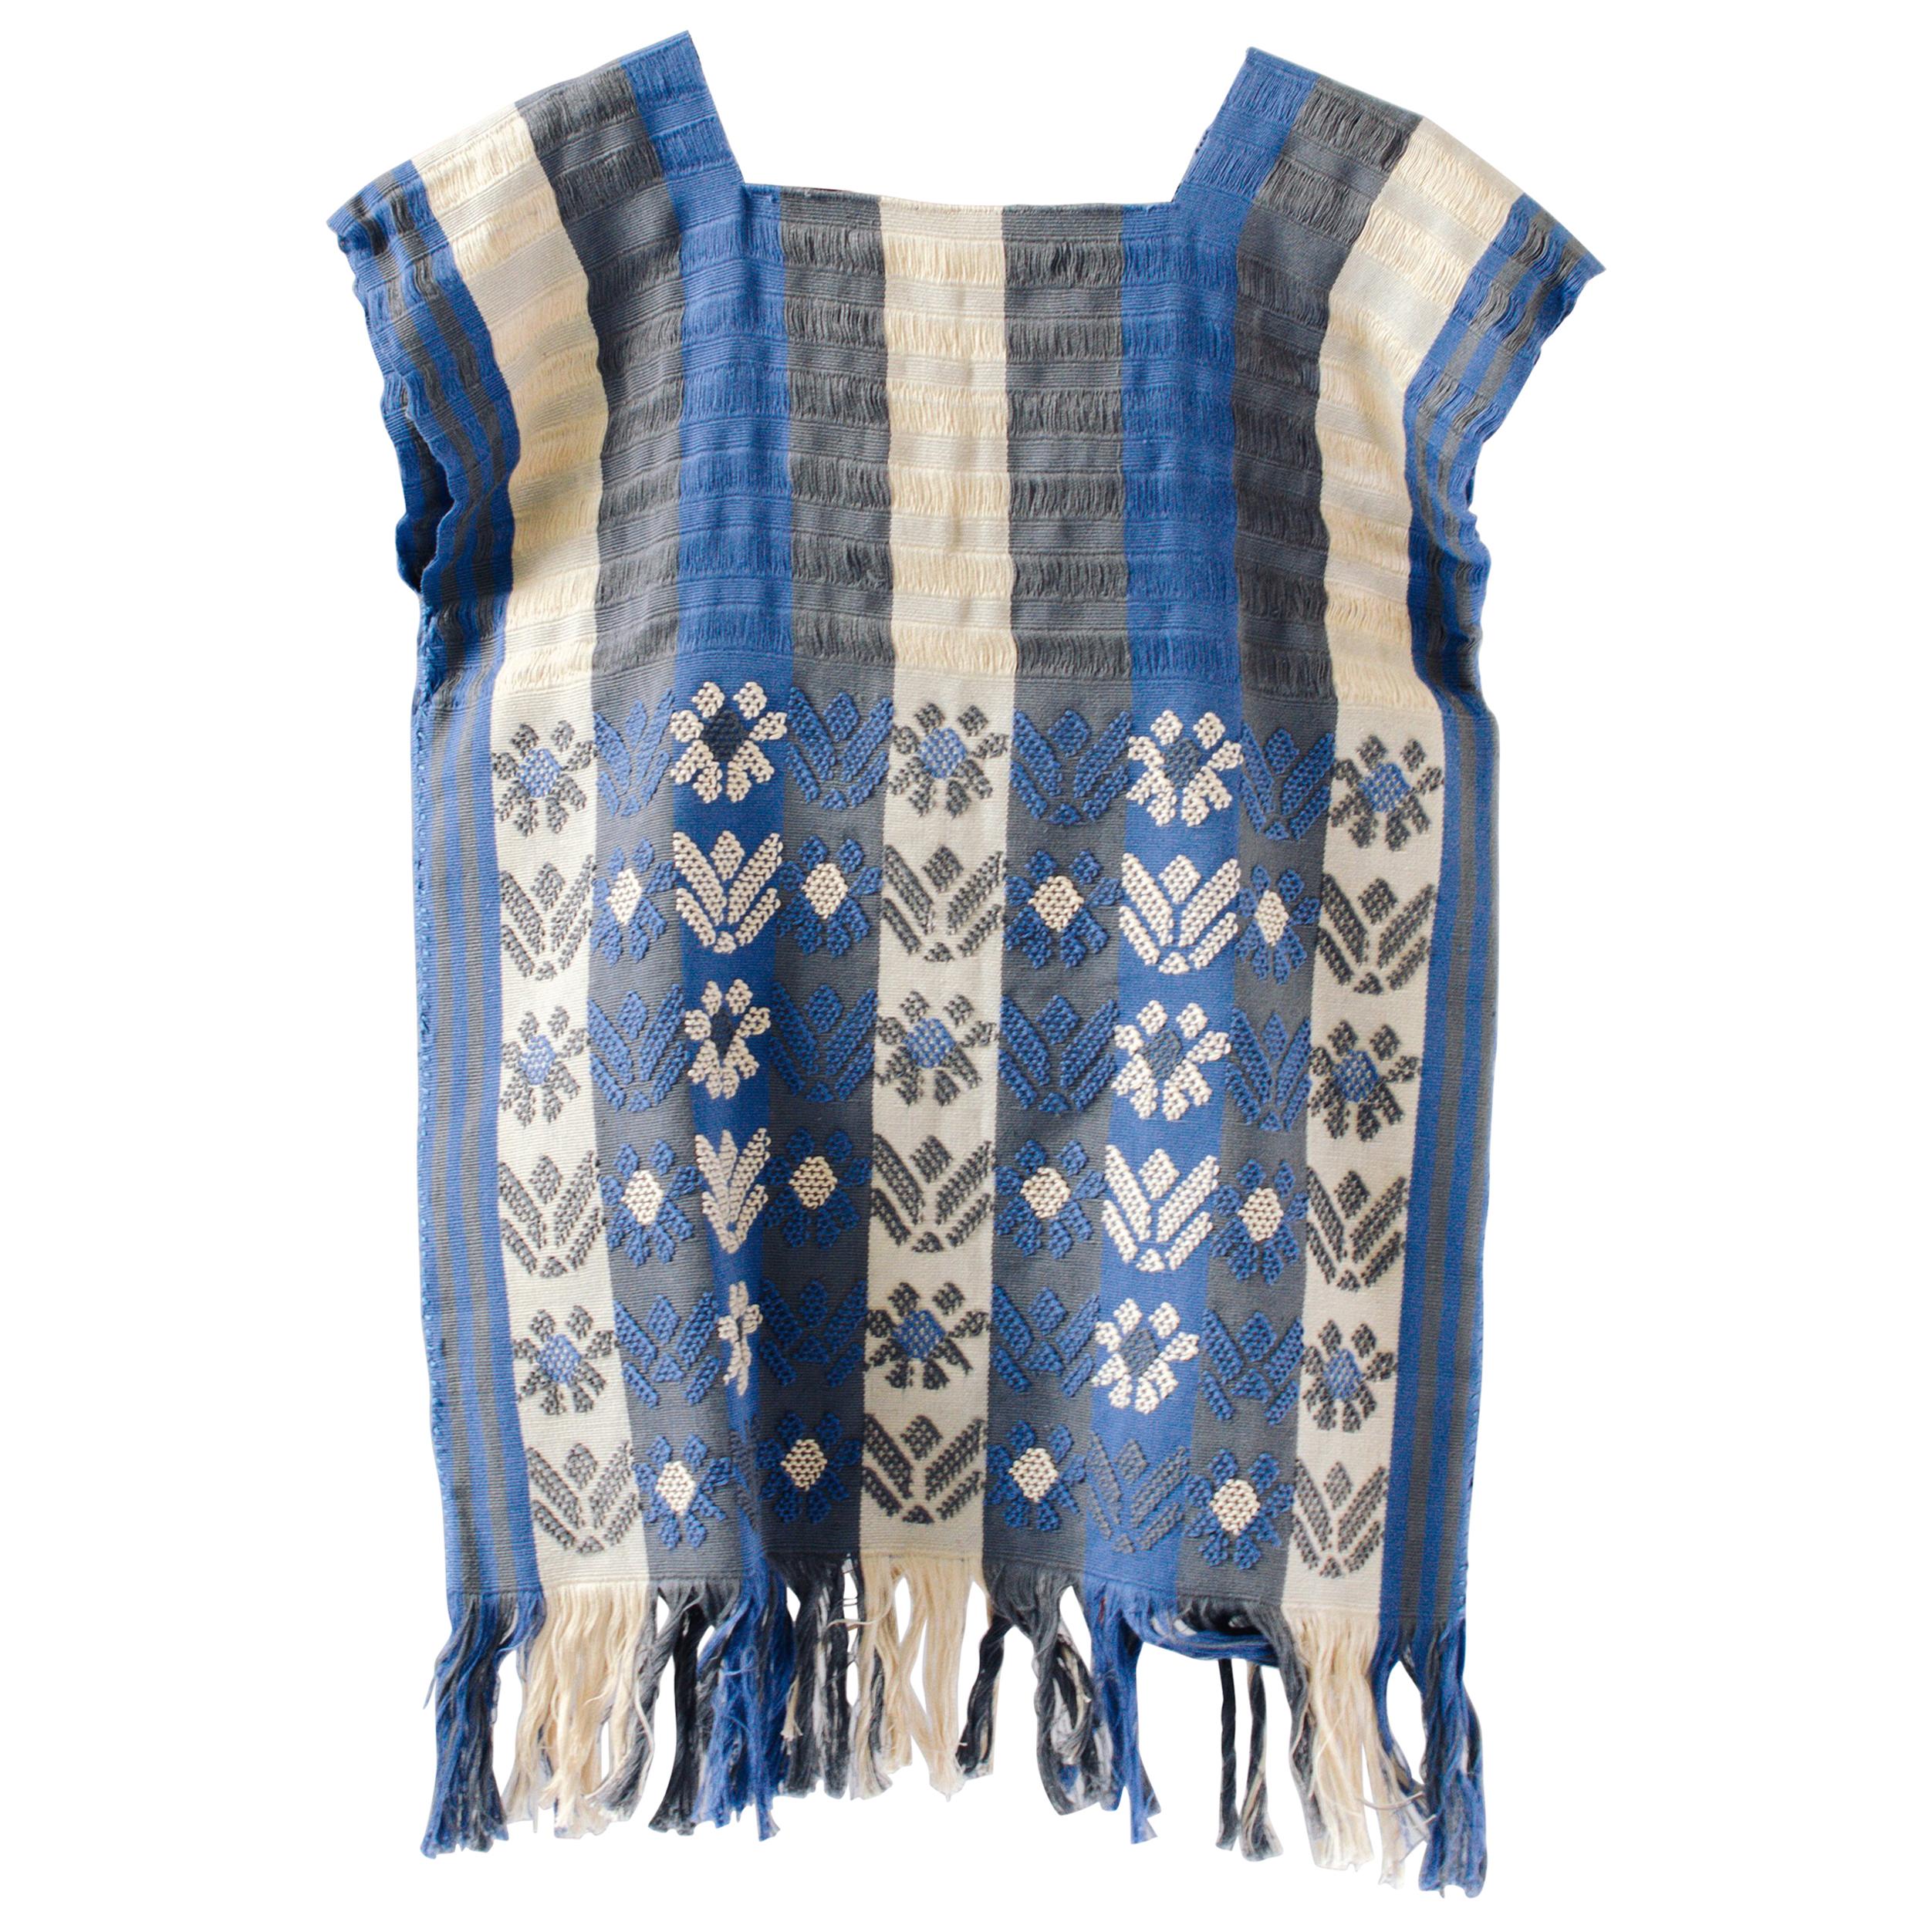 Native Mexican Chiapas Weaved Blouse for Wall Hanging Decoration Huipil Blue